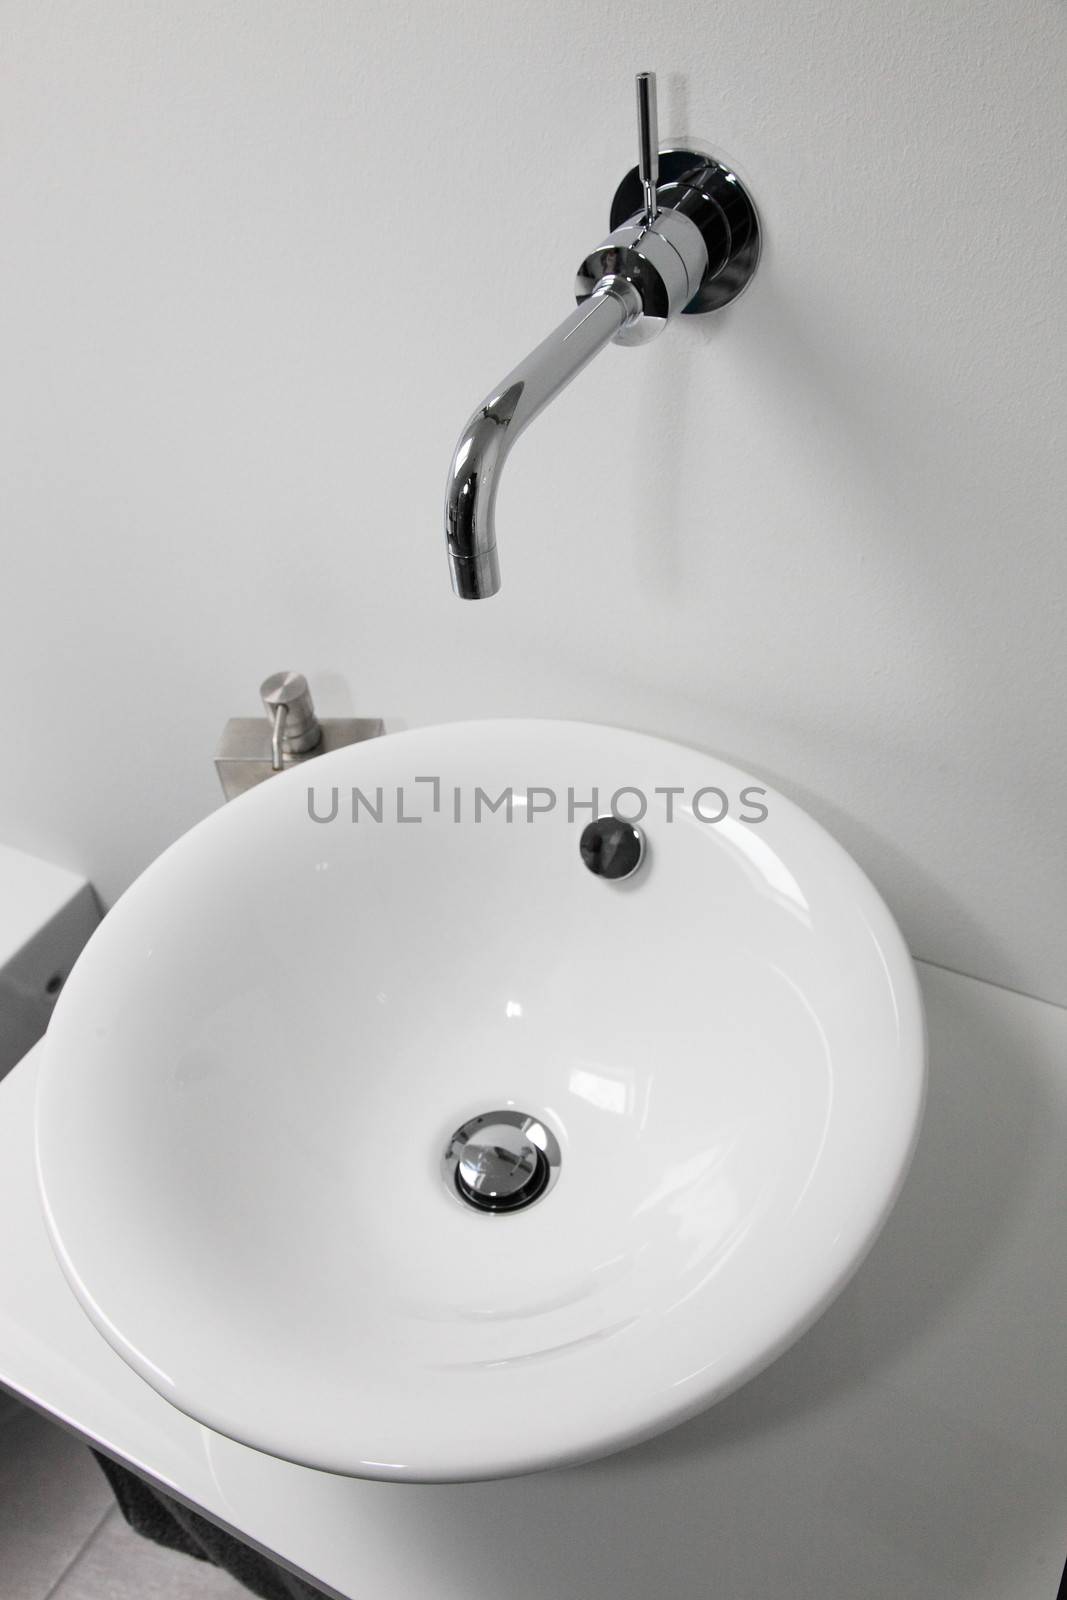 Modern ceramic bowl-shaped handbasin and wall mounted chrome tap in a contemporary bathroom or restroom